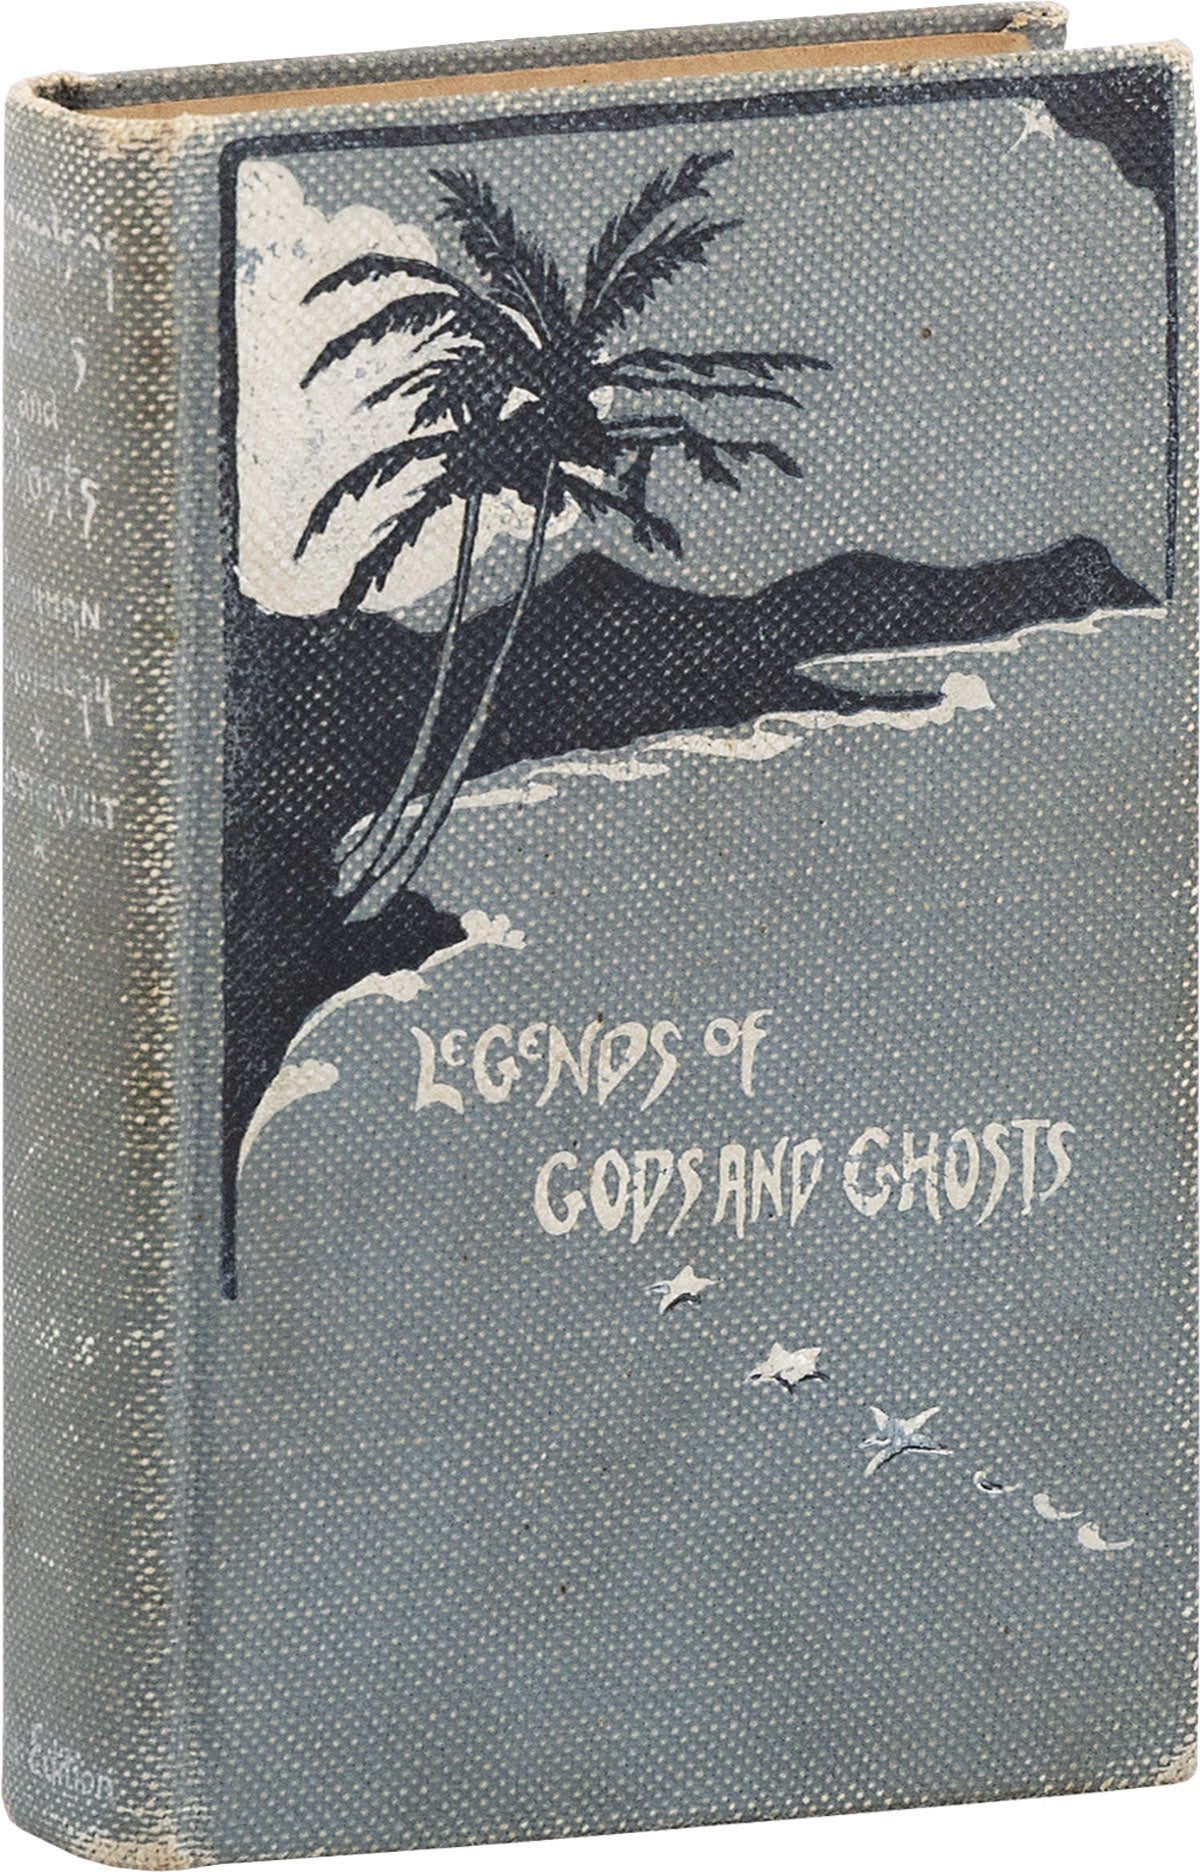 [Item #80735] Legends of Gods and Ghosts (Hawaiian Mythology). Collected and translated from the Hawaiian. HAWAI'I, W. D. WESTERVELT, William Drake.